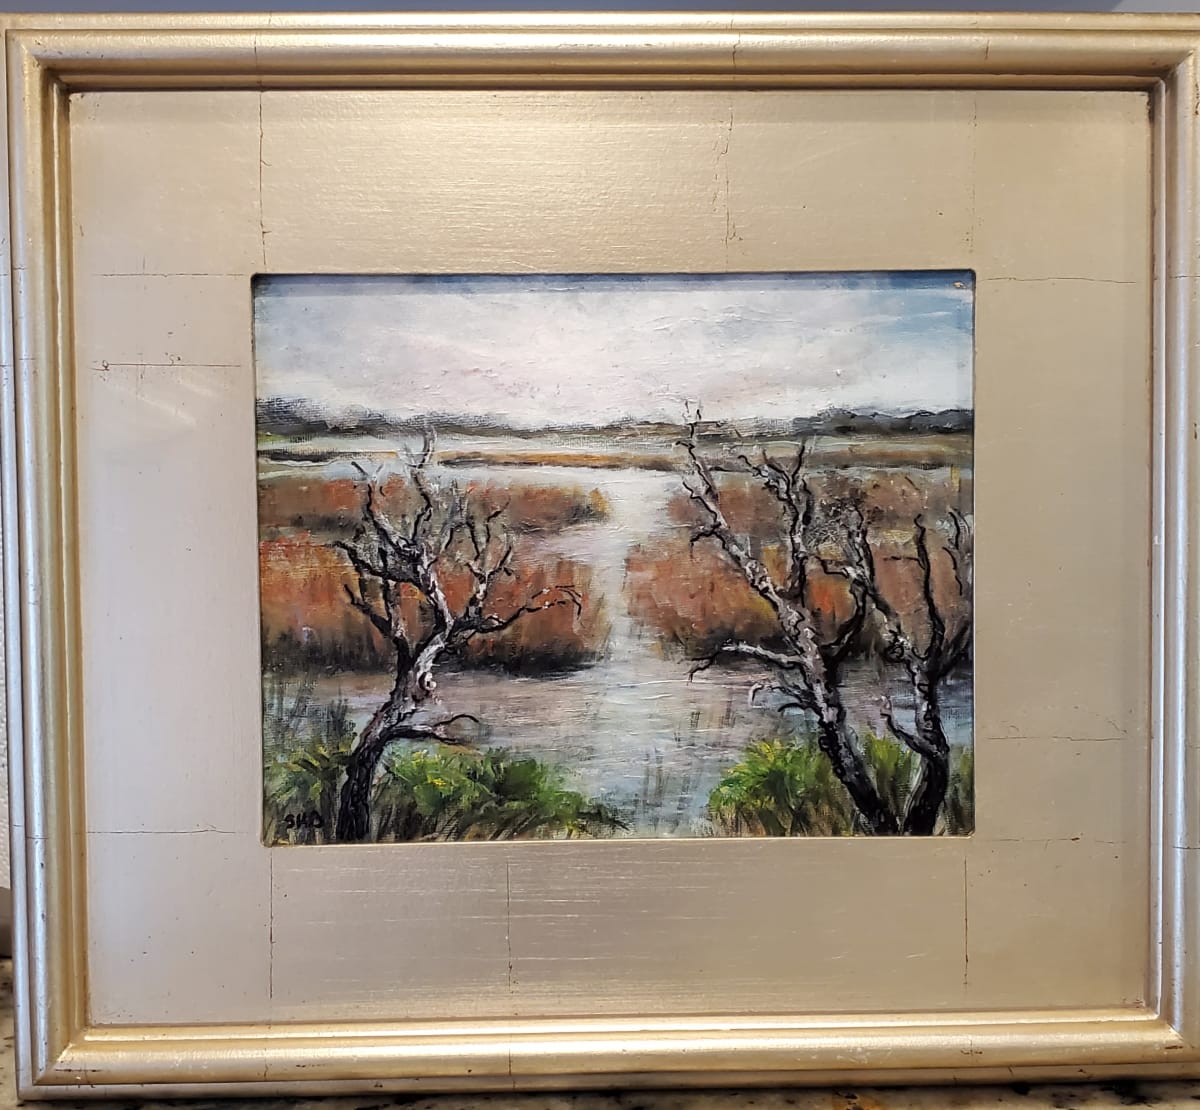 Two Trees at Edisto by Susan Bryant  Image: I painted this view from my cousin's picnic shelter at Little Edisto Island, South Carolina.